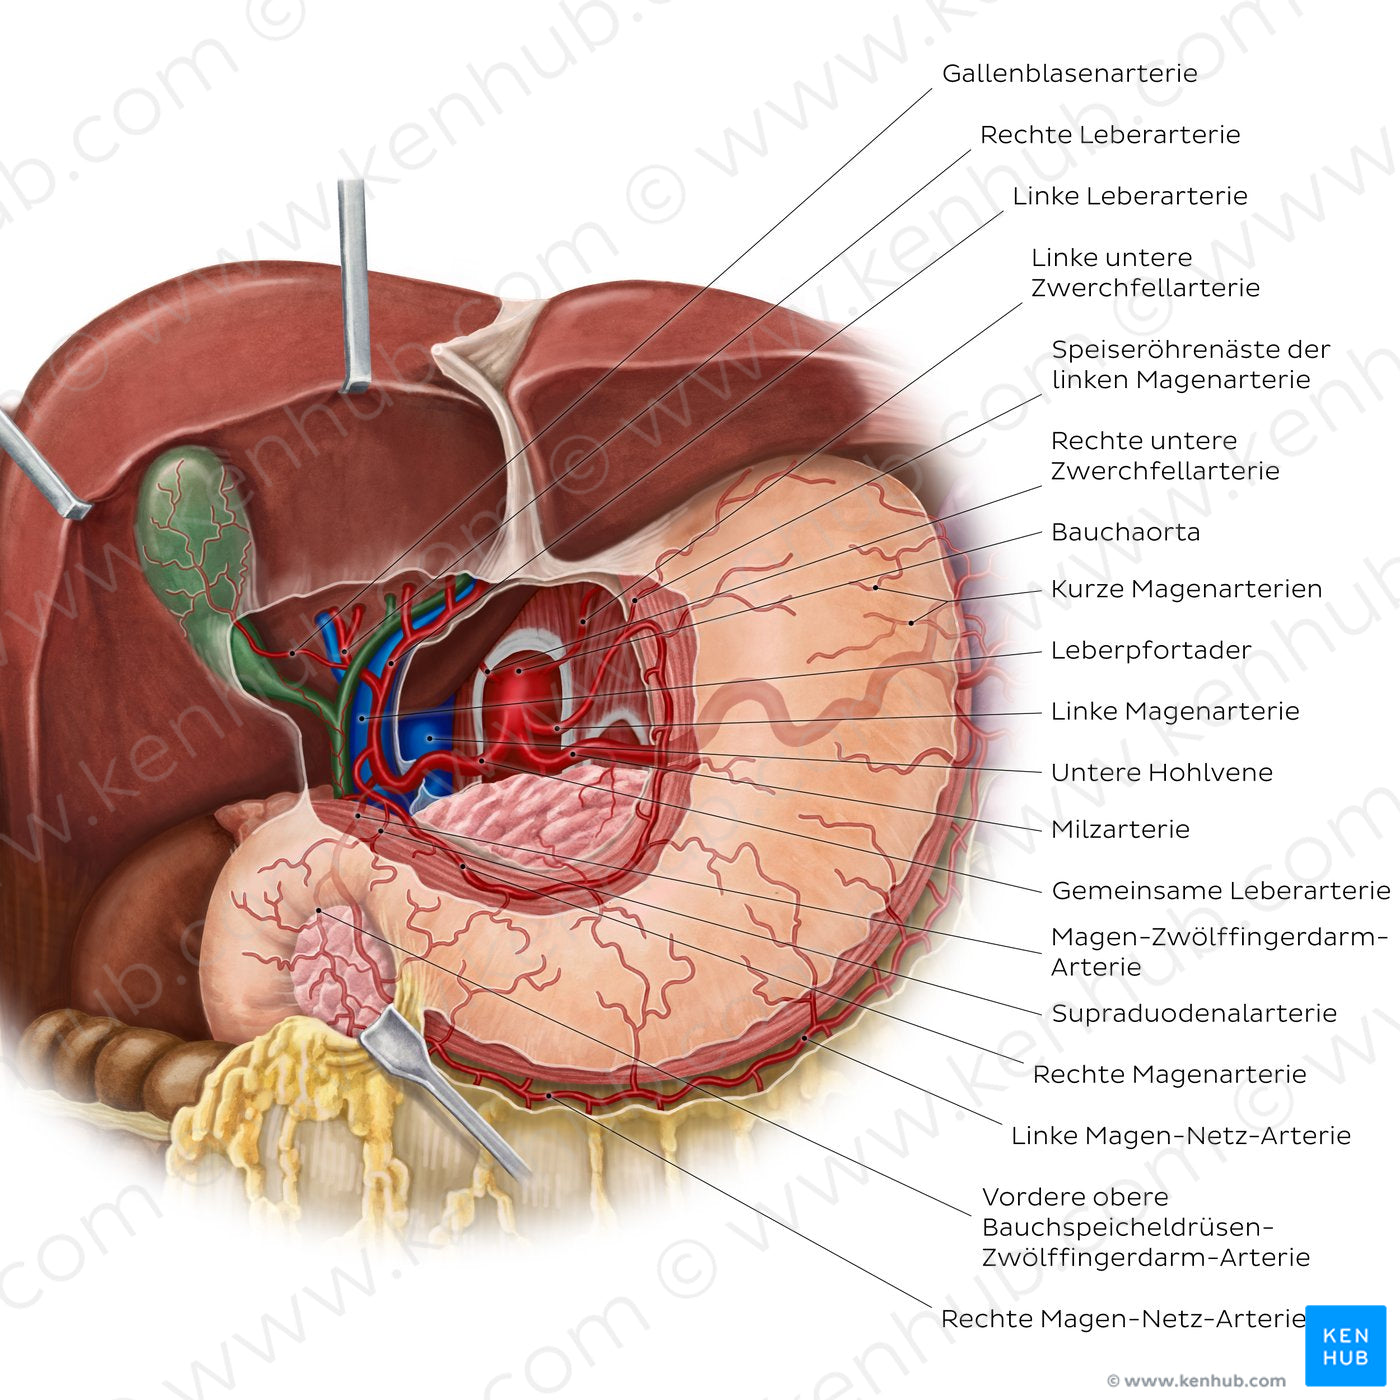 Arteries of the stomach, liver and spleen (German)